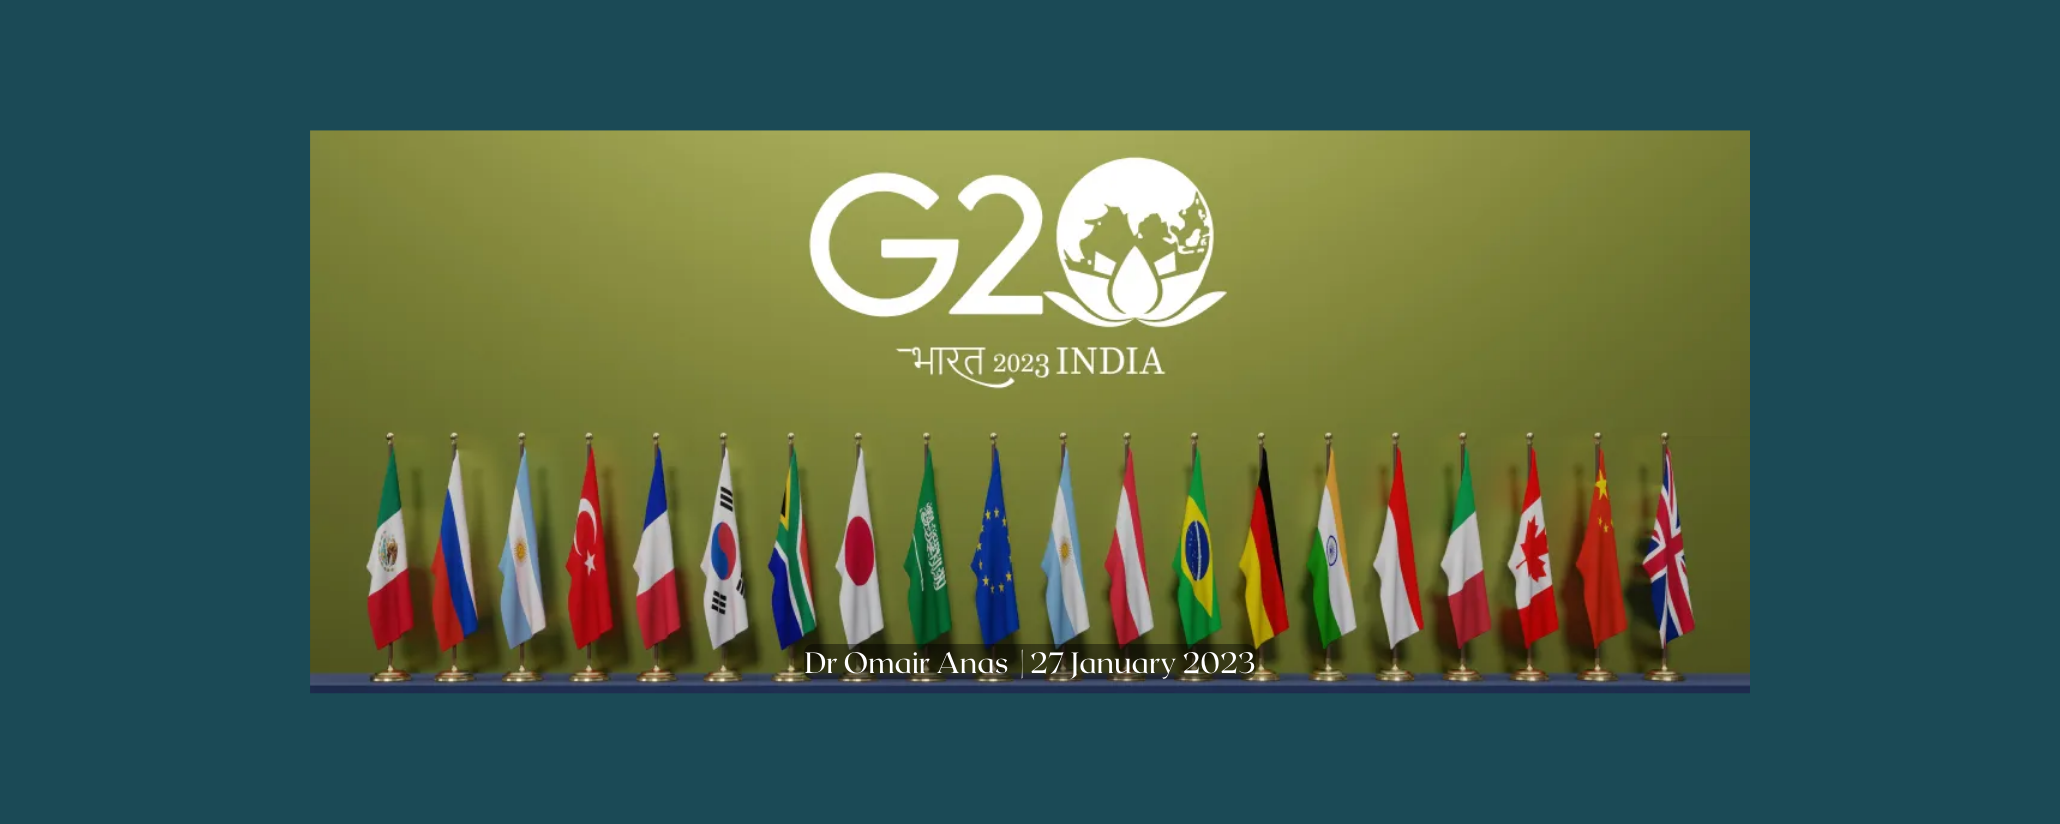 Opportunities and Challenges of India’s G-20 Presidency